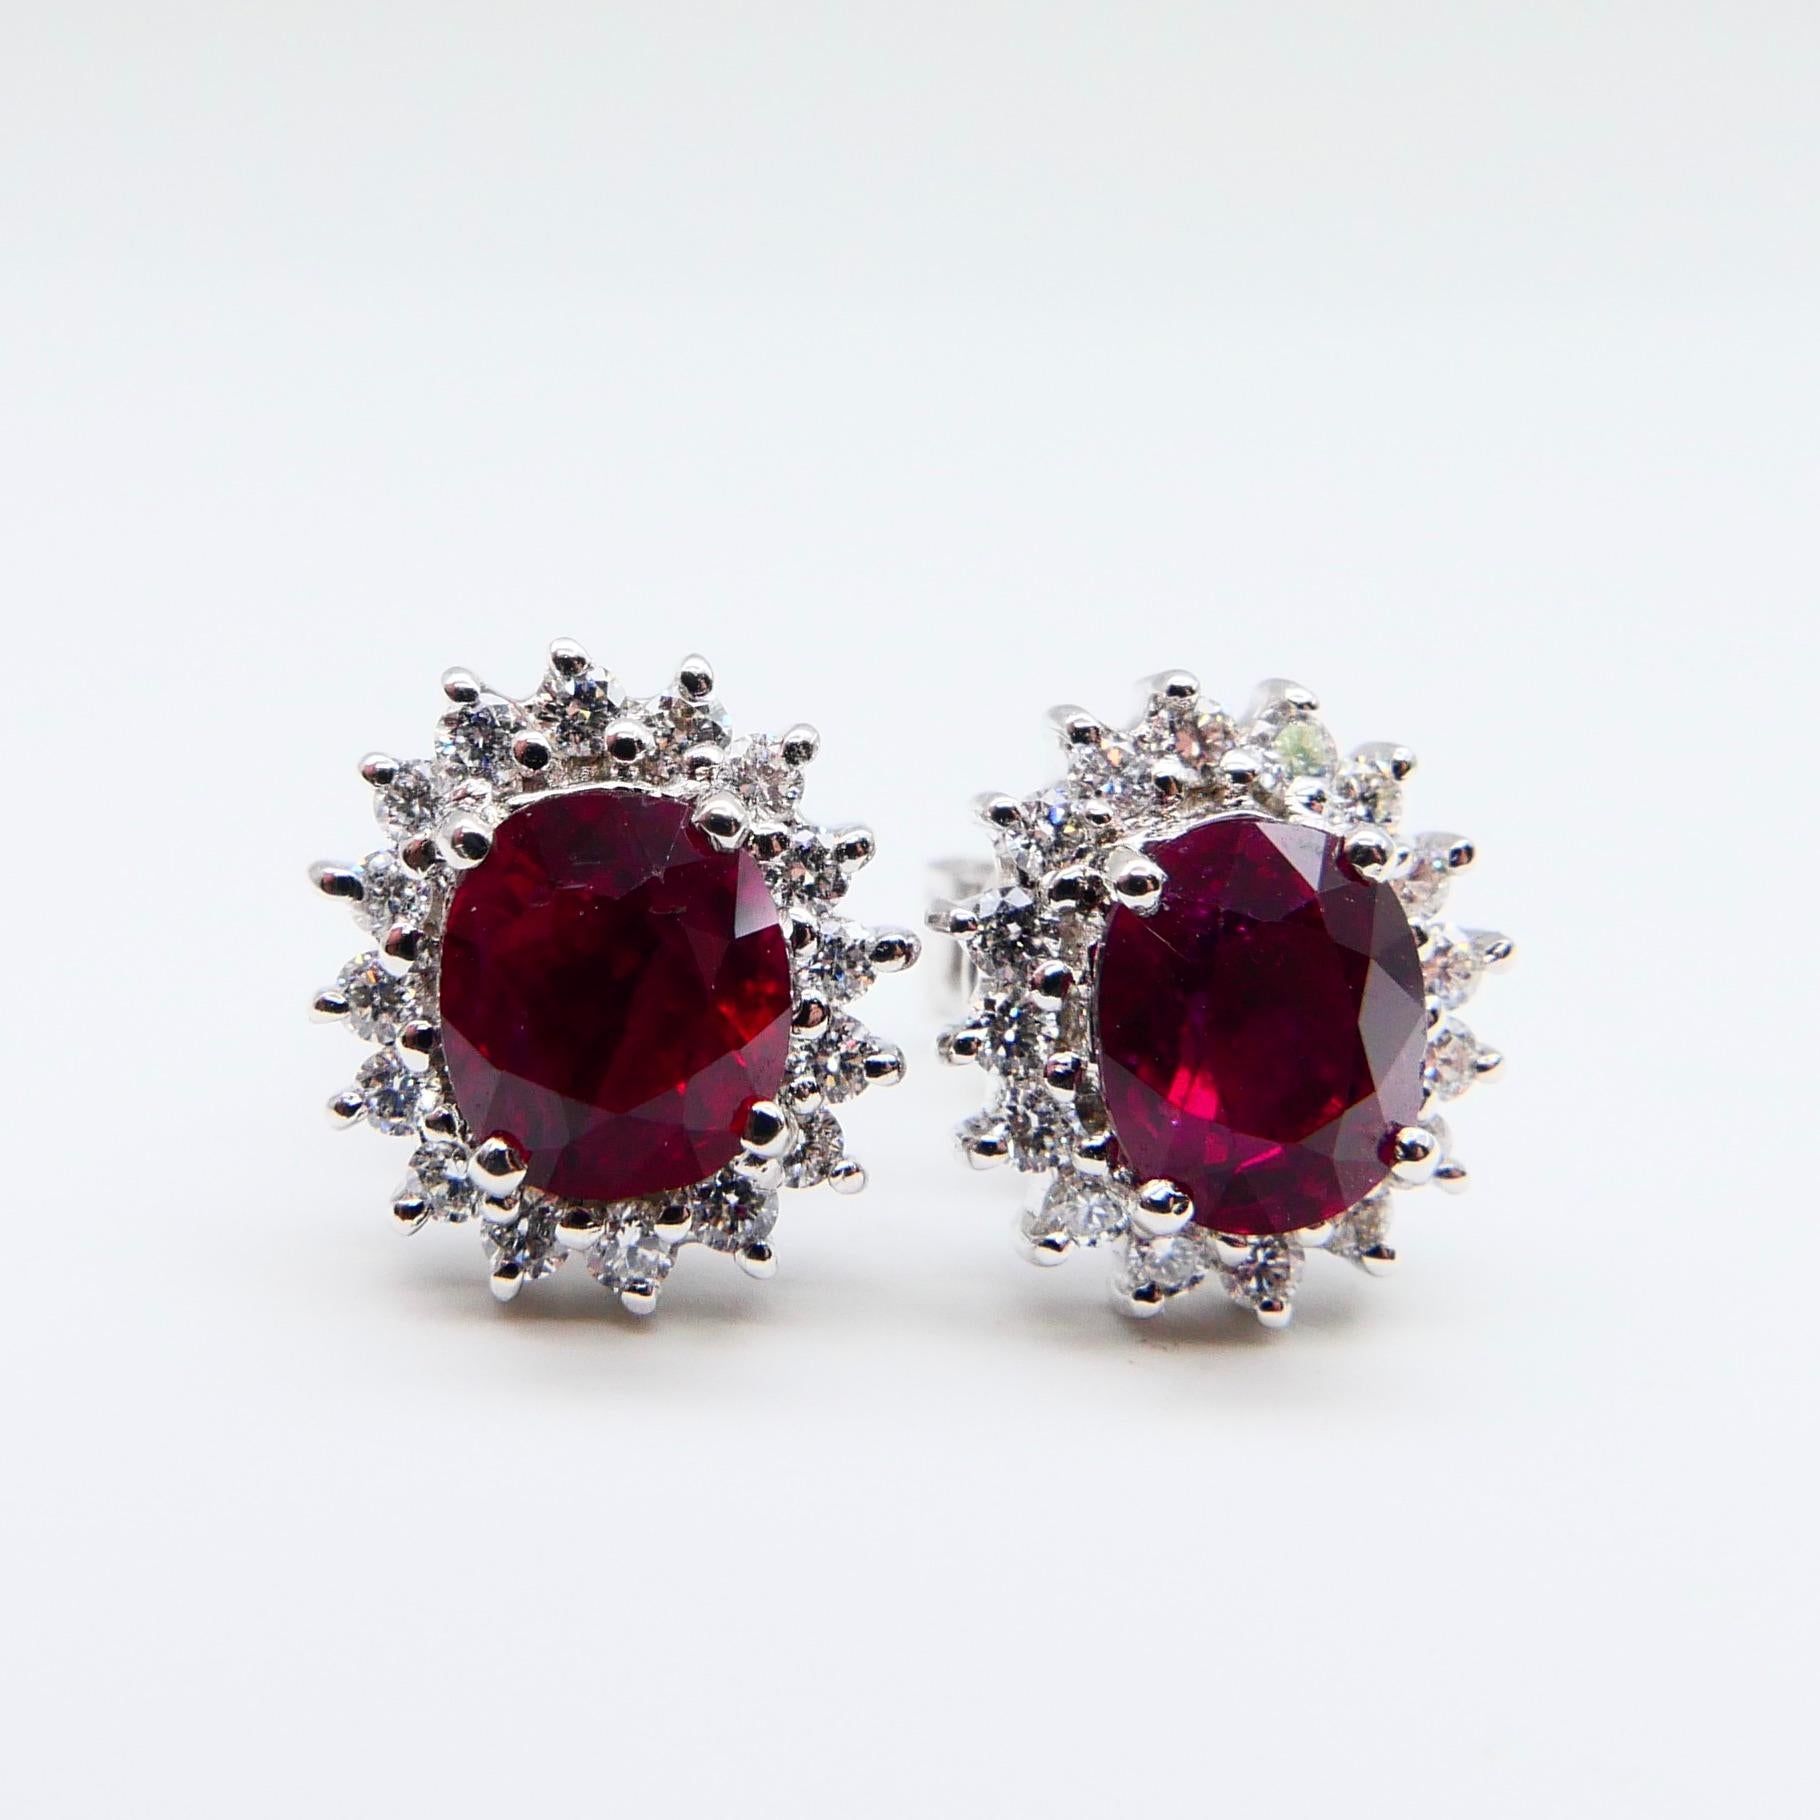 Vivid Red Ruby 2.09 Carat and Diamond Stud Earrings, Close to Pigeon Blood Red 6